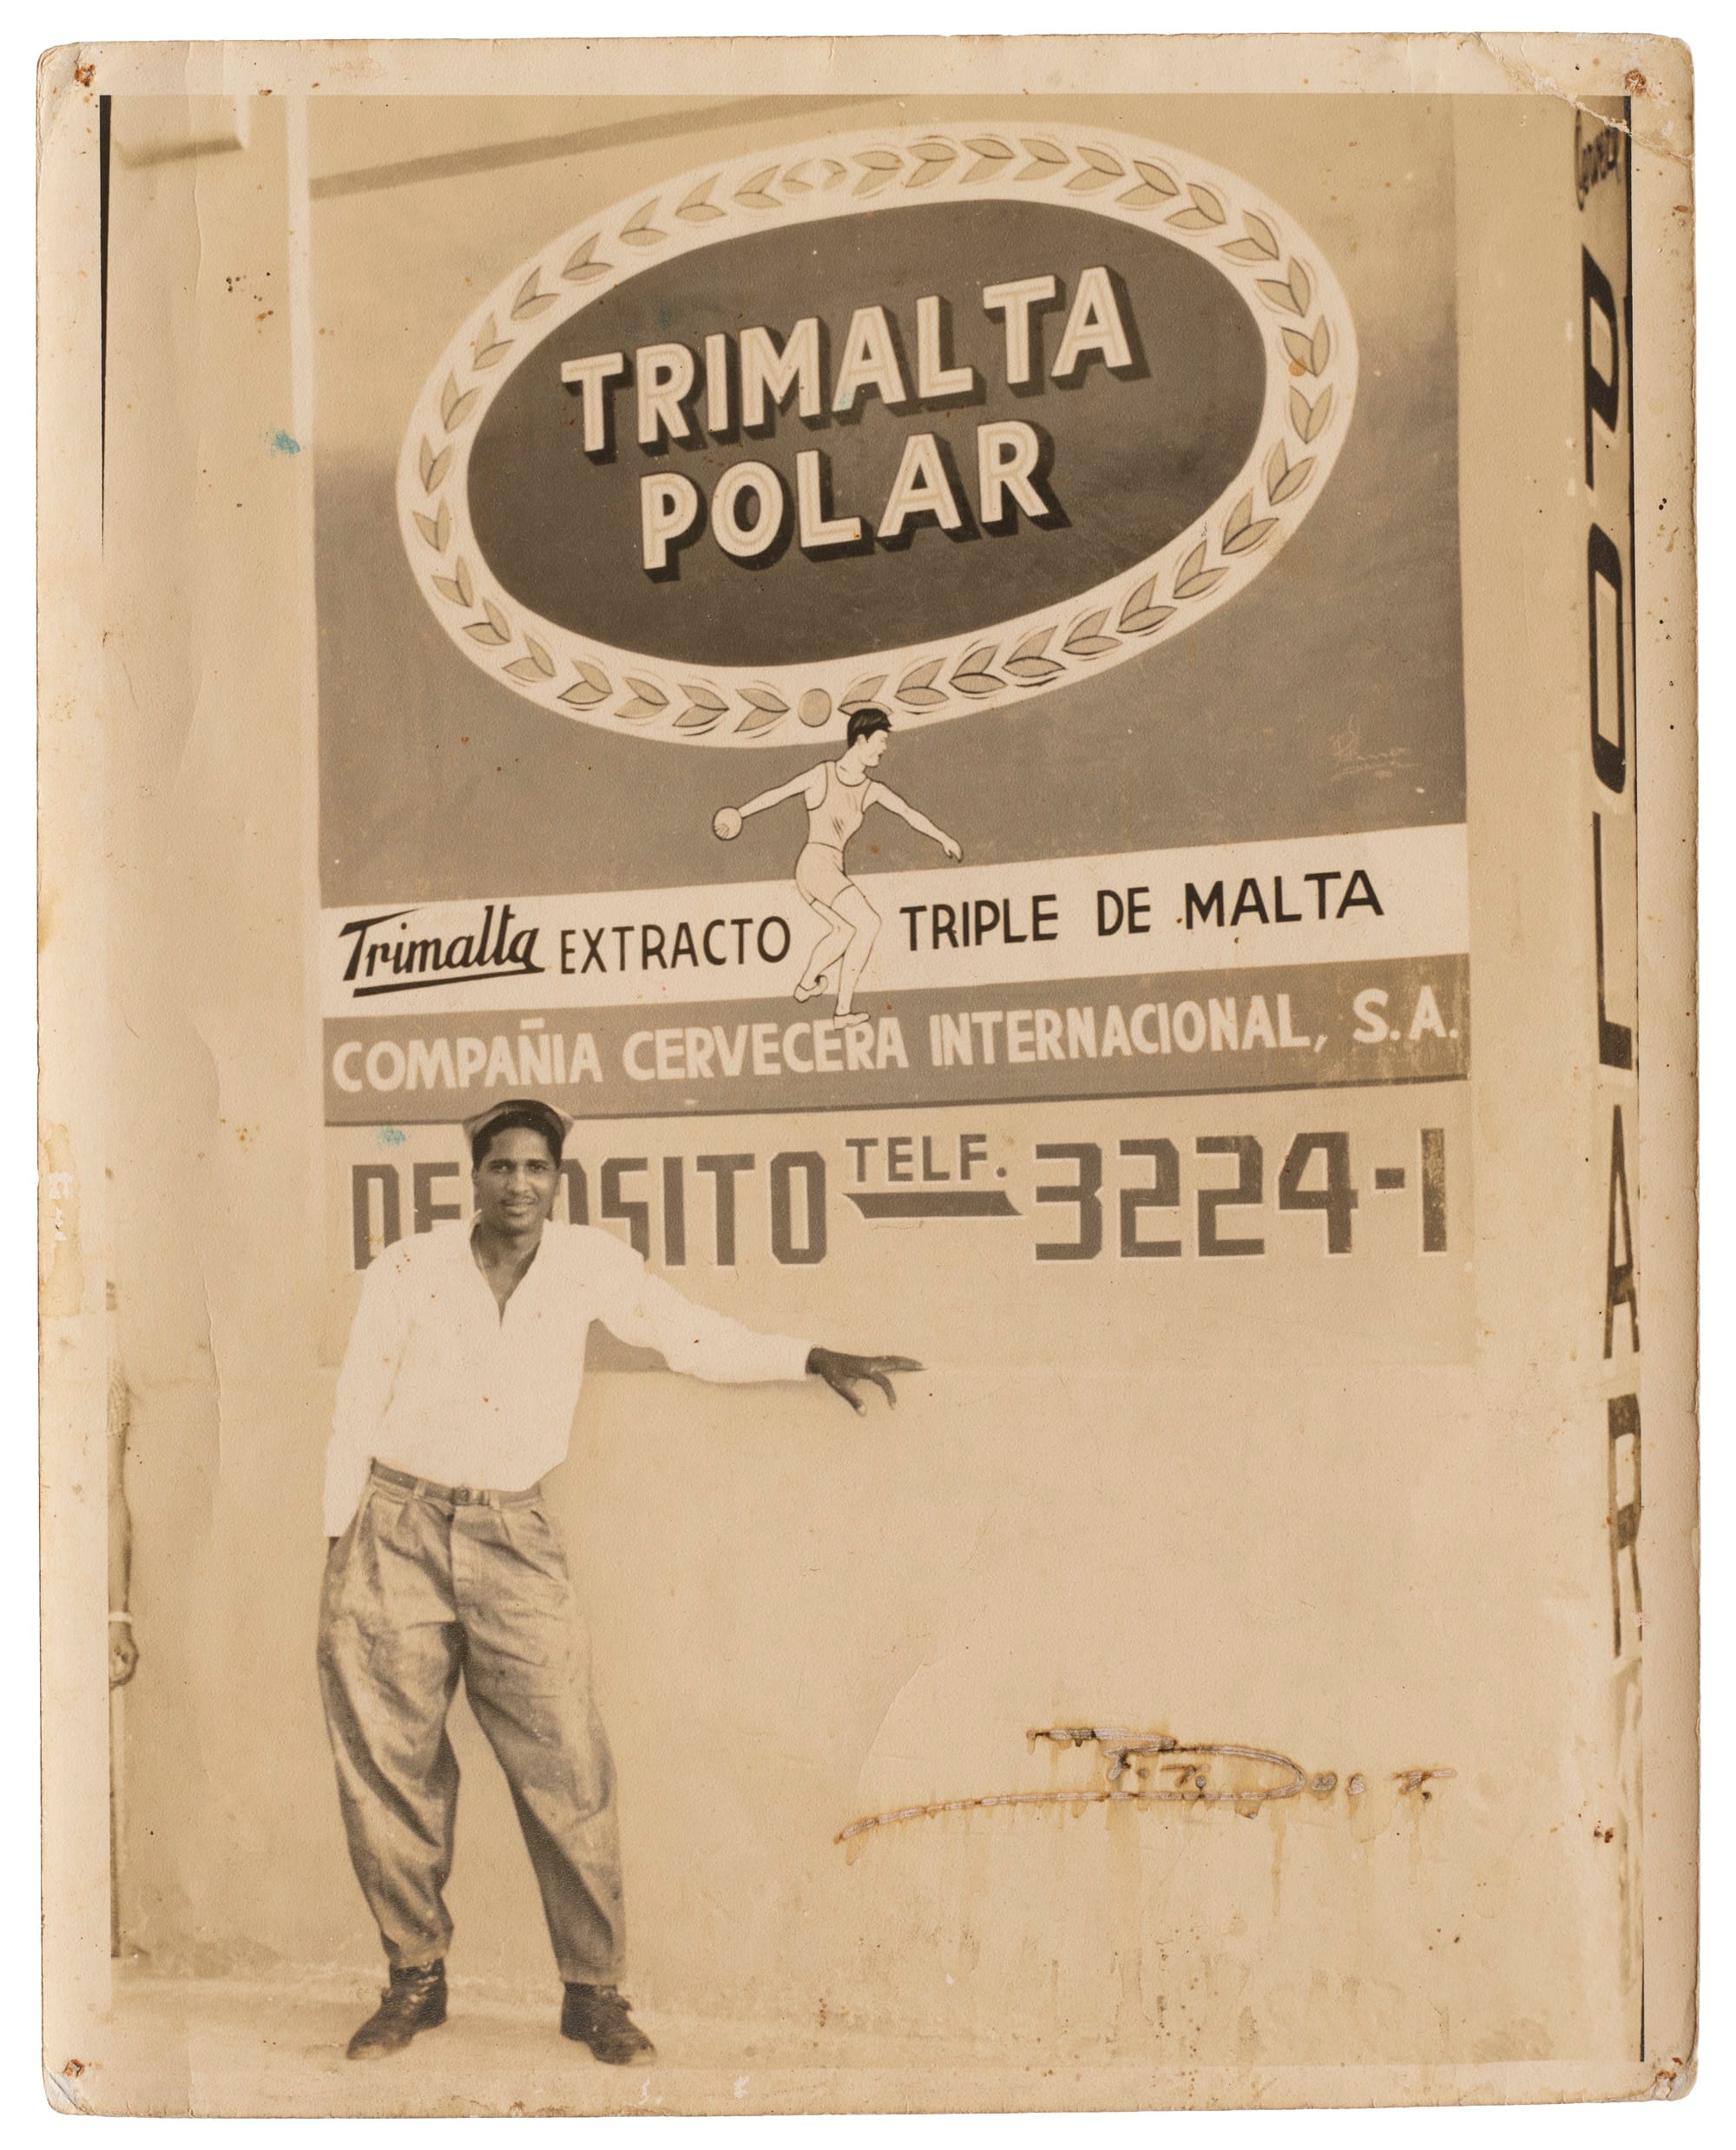 Smartly dressed man posint in front of a painted wall advertisement for 'Trimalta Polar'.